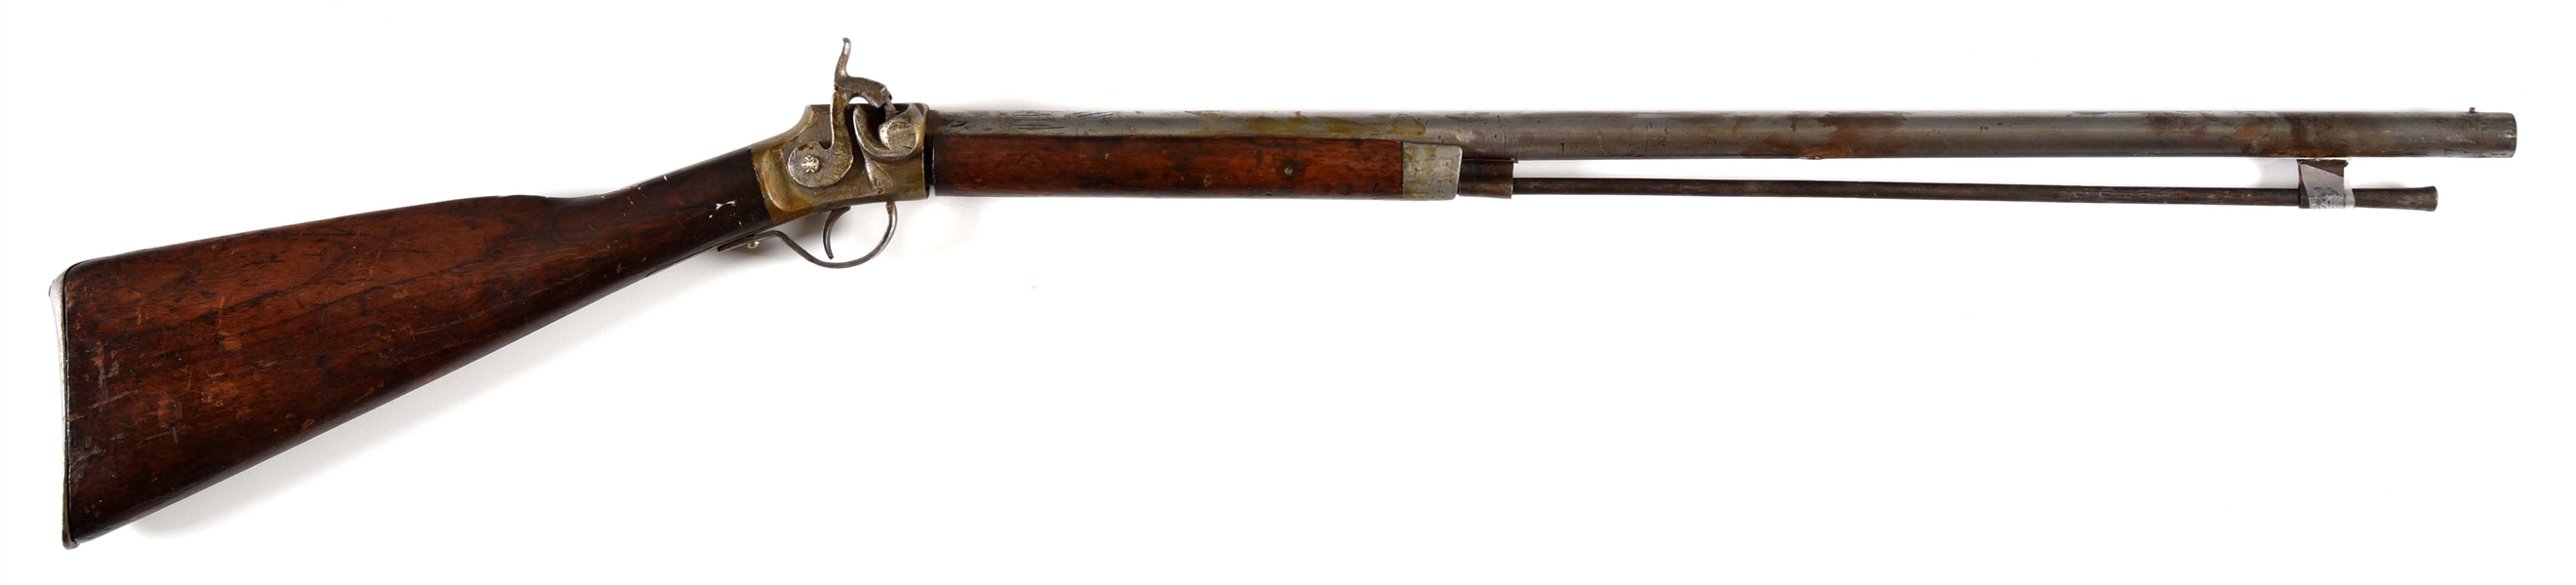 (A) WHITNEY MARKED 20 GAUGE PERCUSSION SHOTGUN.